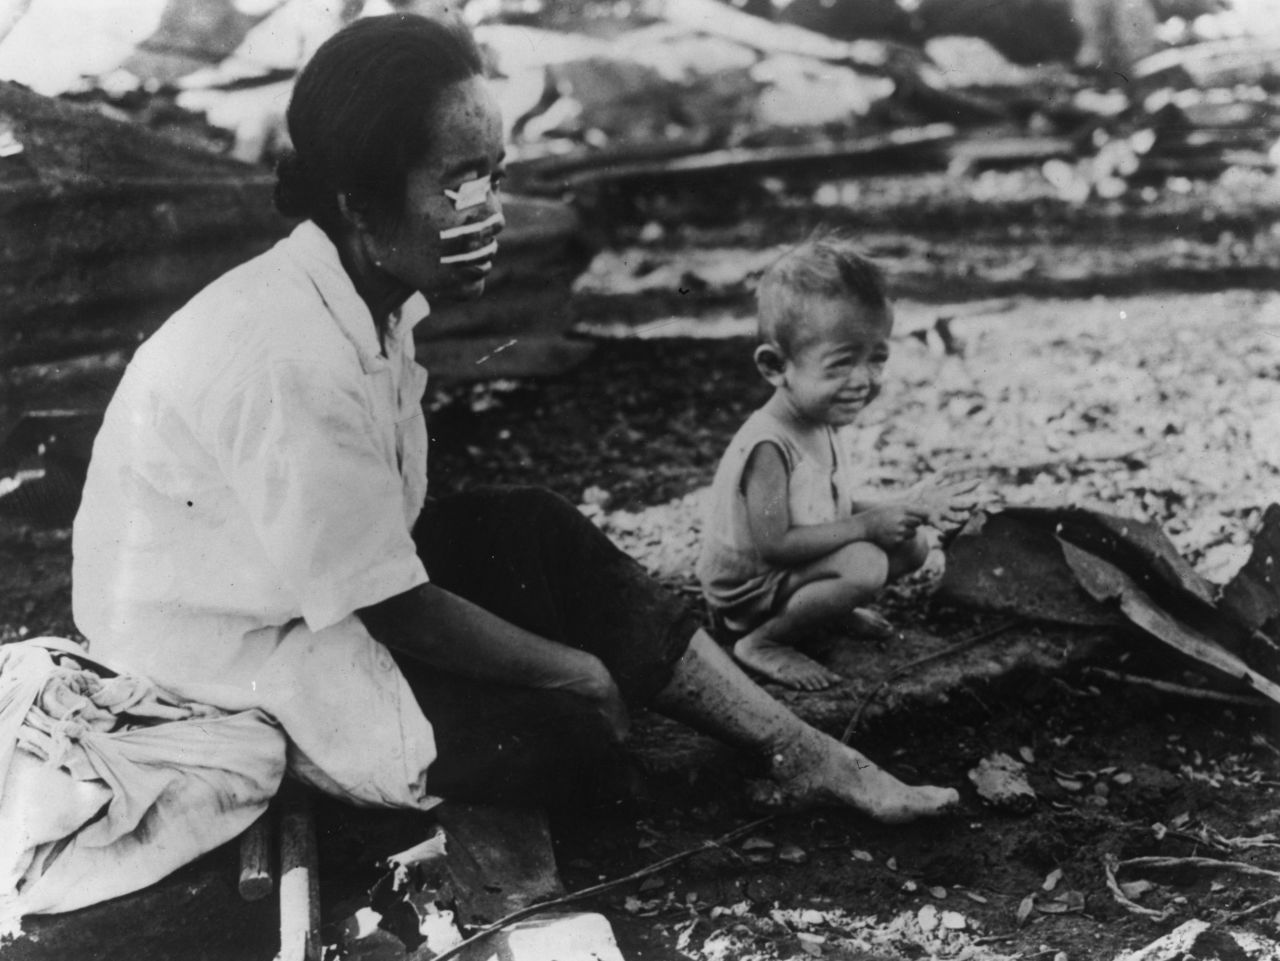 A Filipina woman wounded in the face by shrapnel waits in front of her burnt home in Manila in March 1945. An estimated million Filipino civilians died during World War II.  